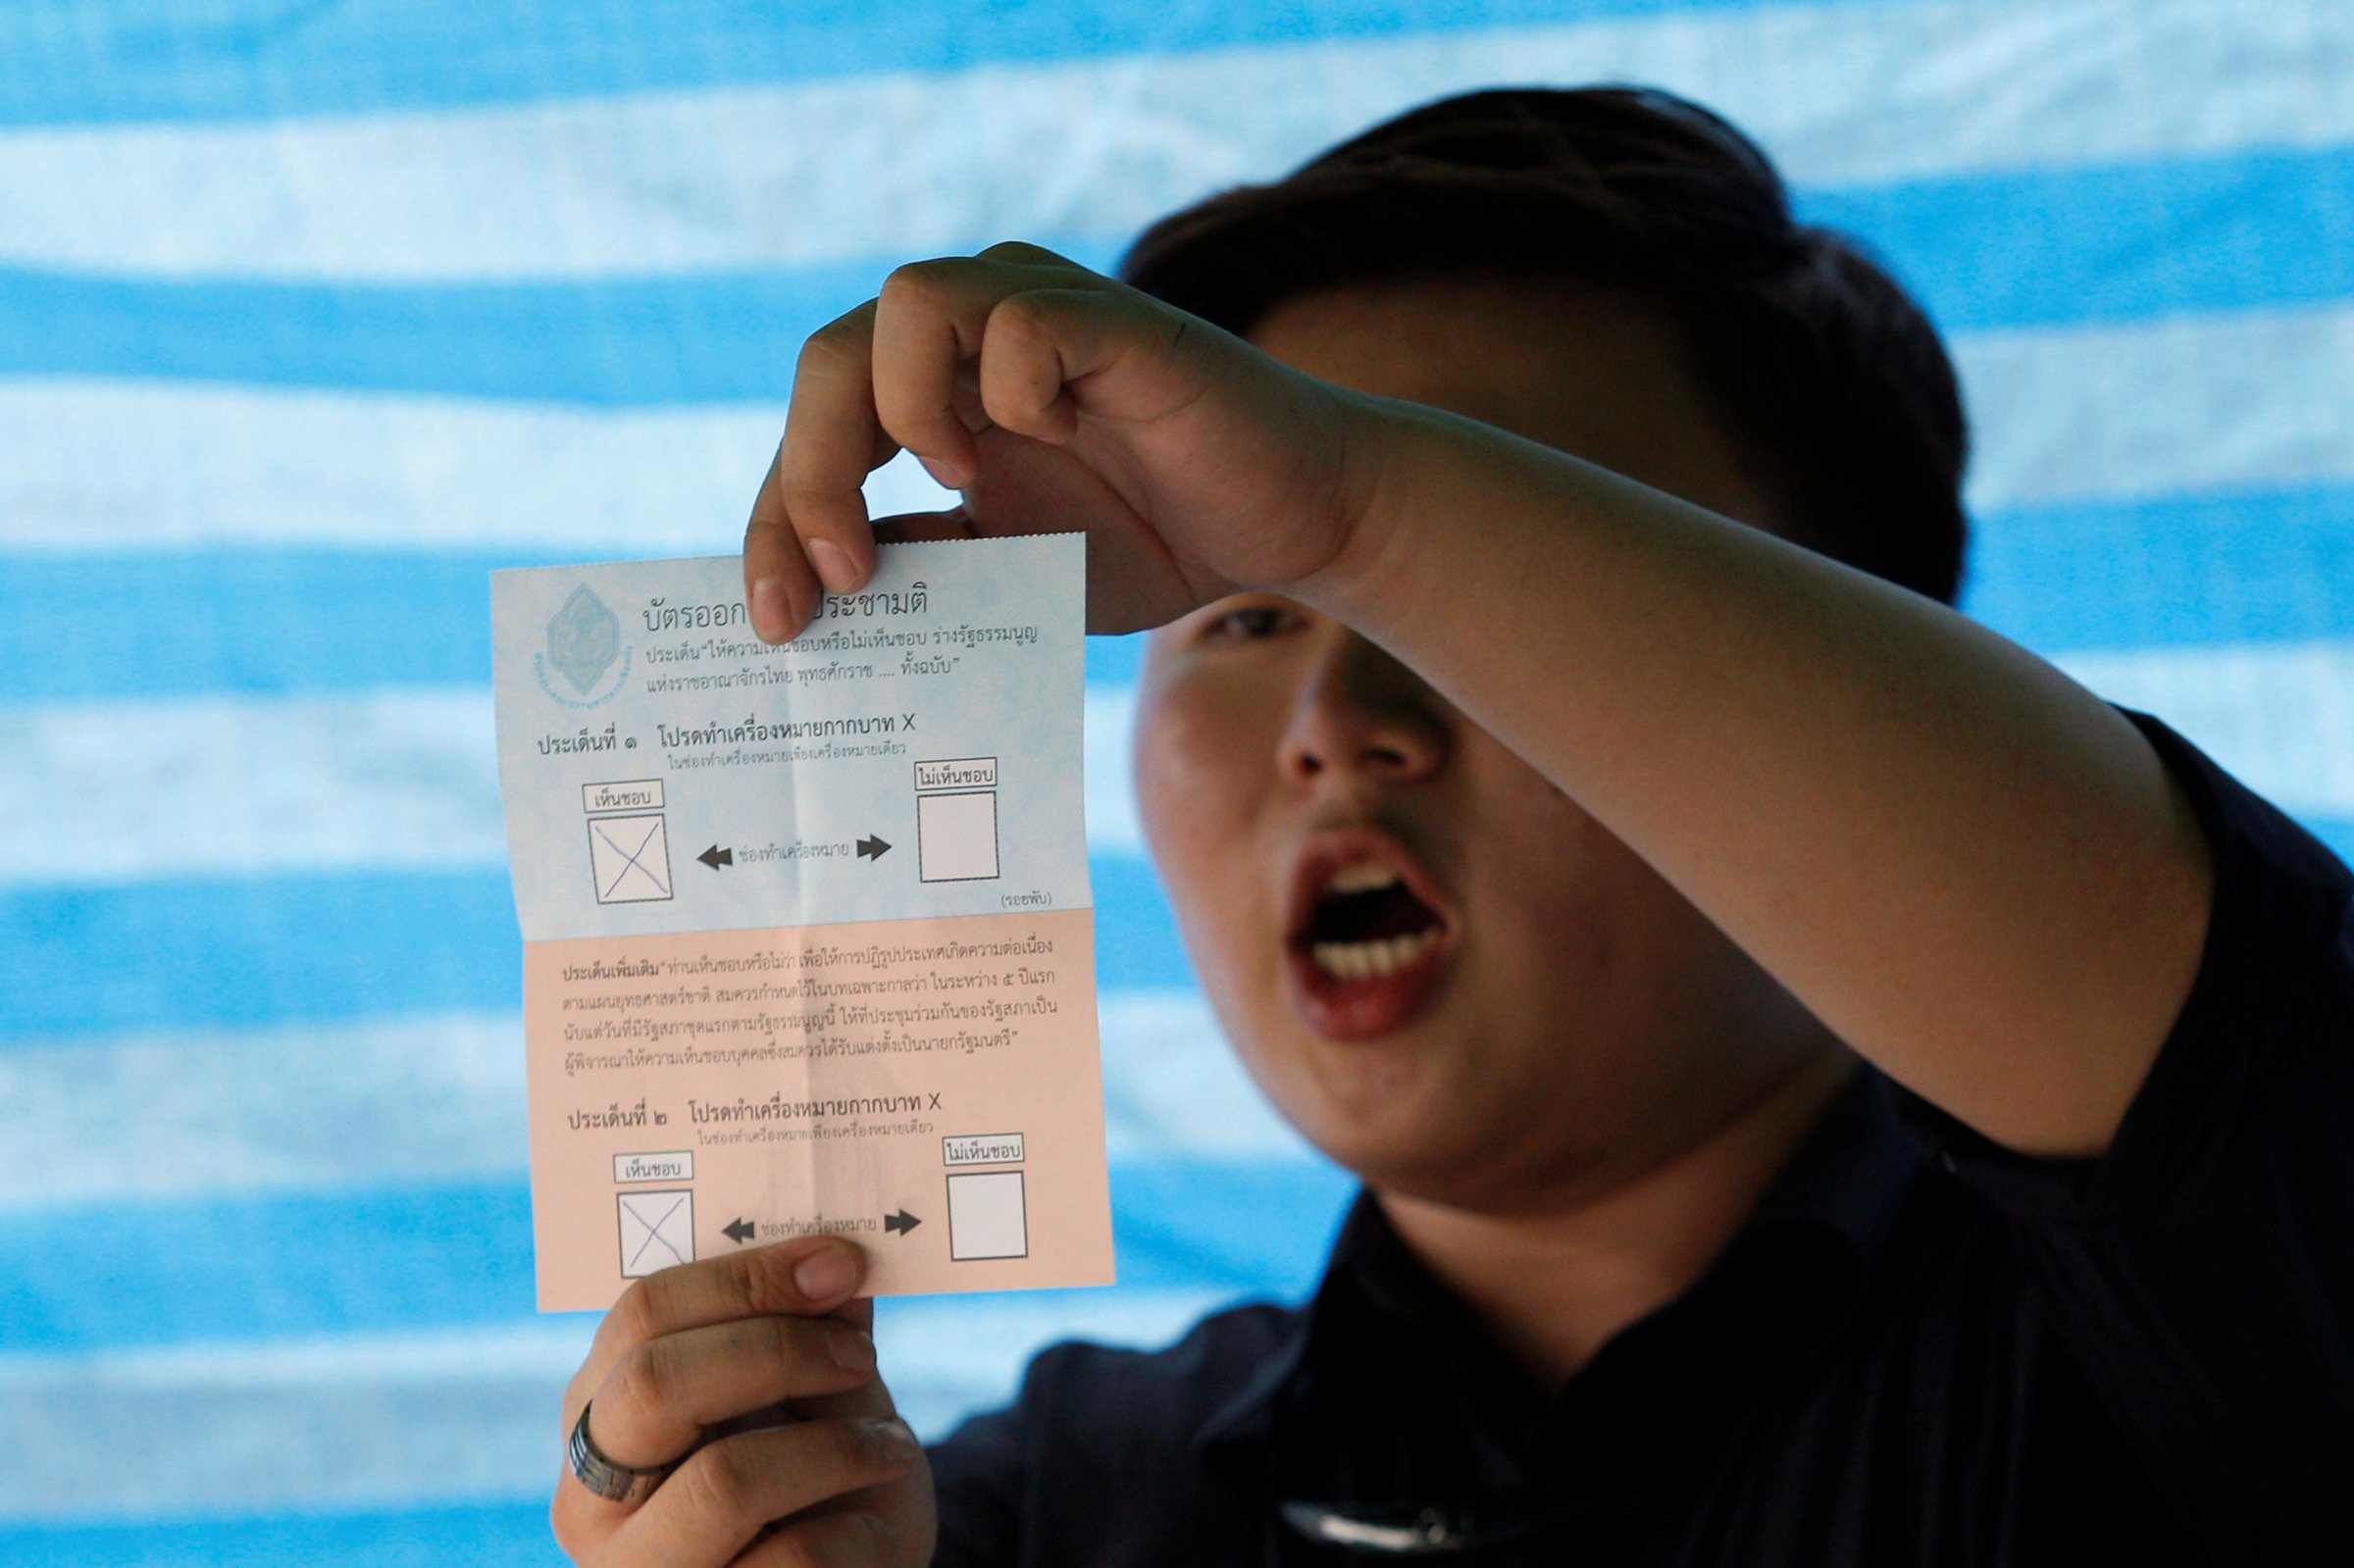 A Thai electoral worker starts counting ballots at a polling station during a constitutional referendum vote in Bangkok